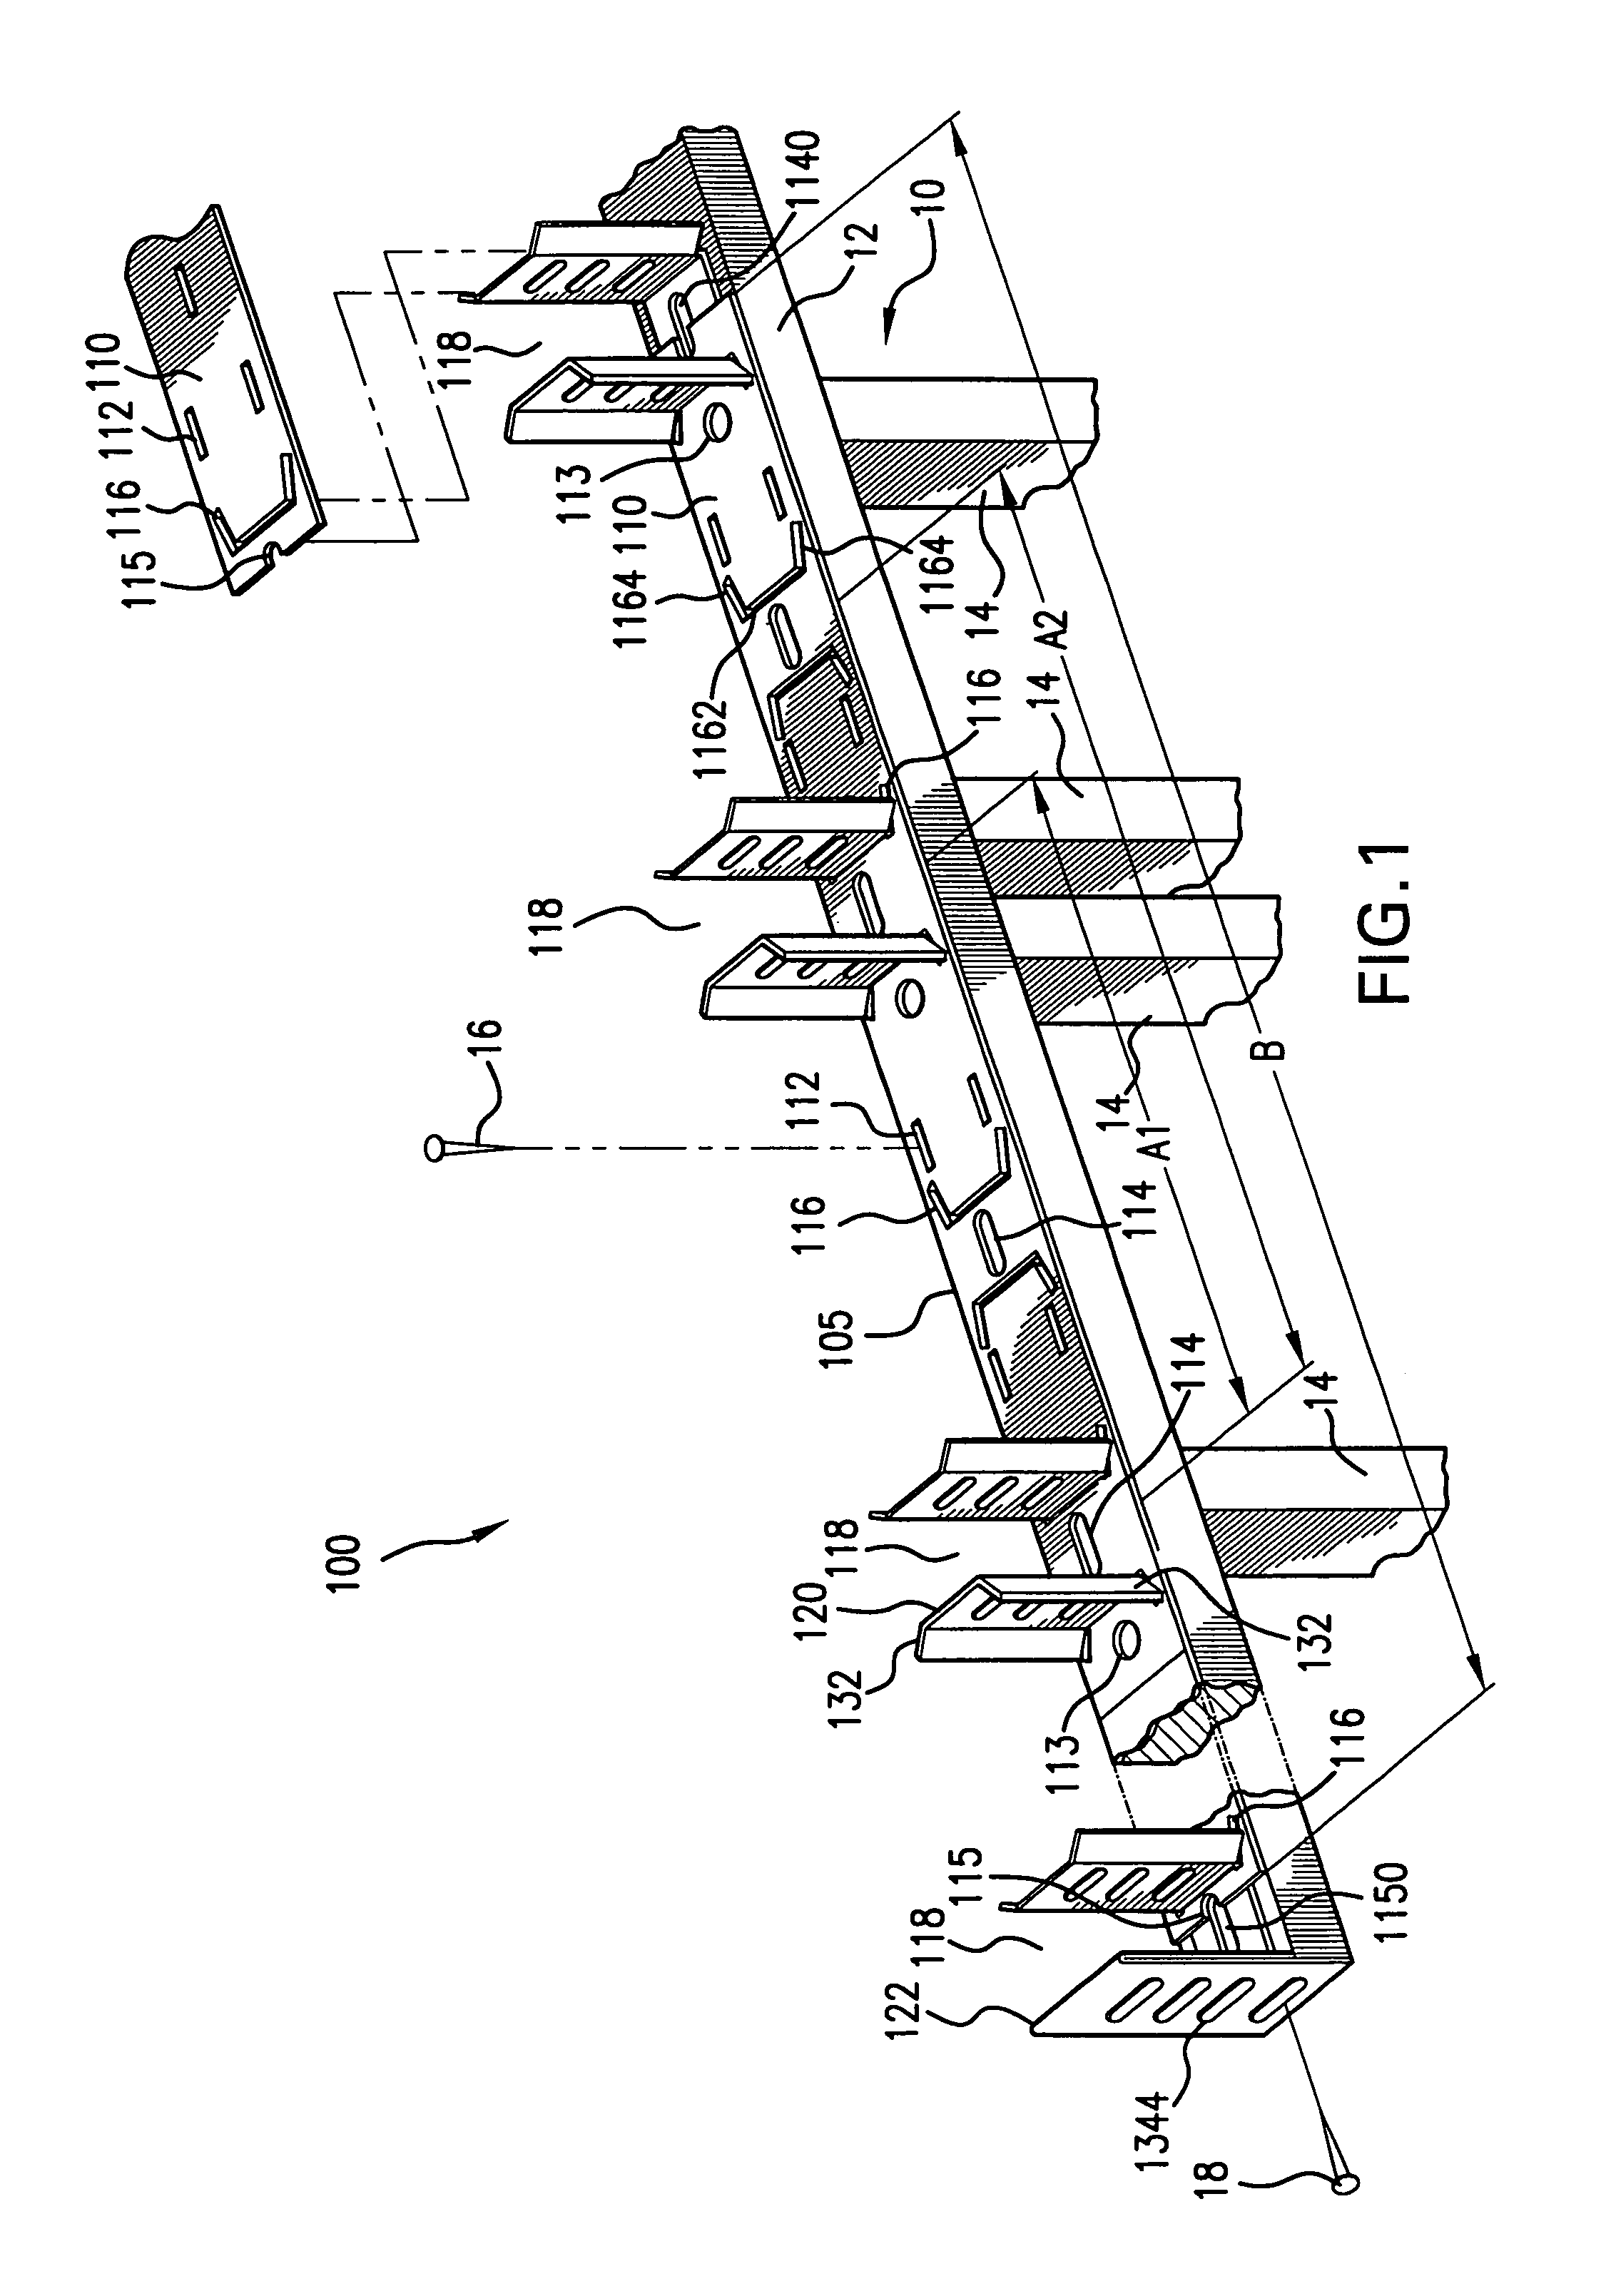 Universal structural member support and positioning system